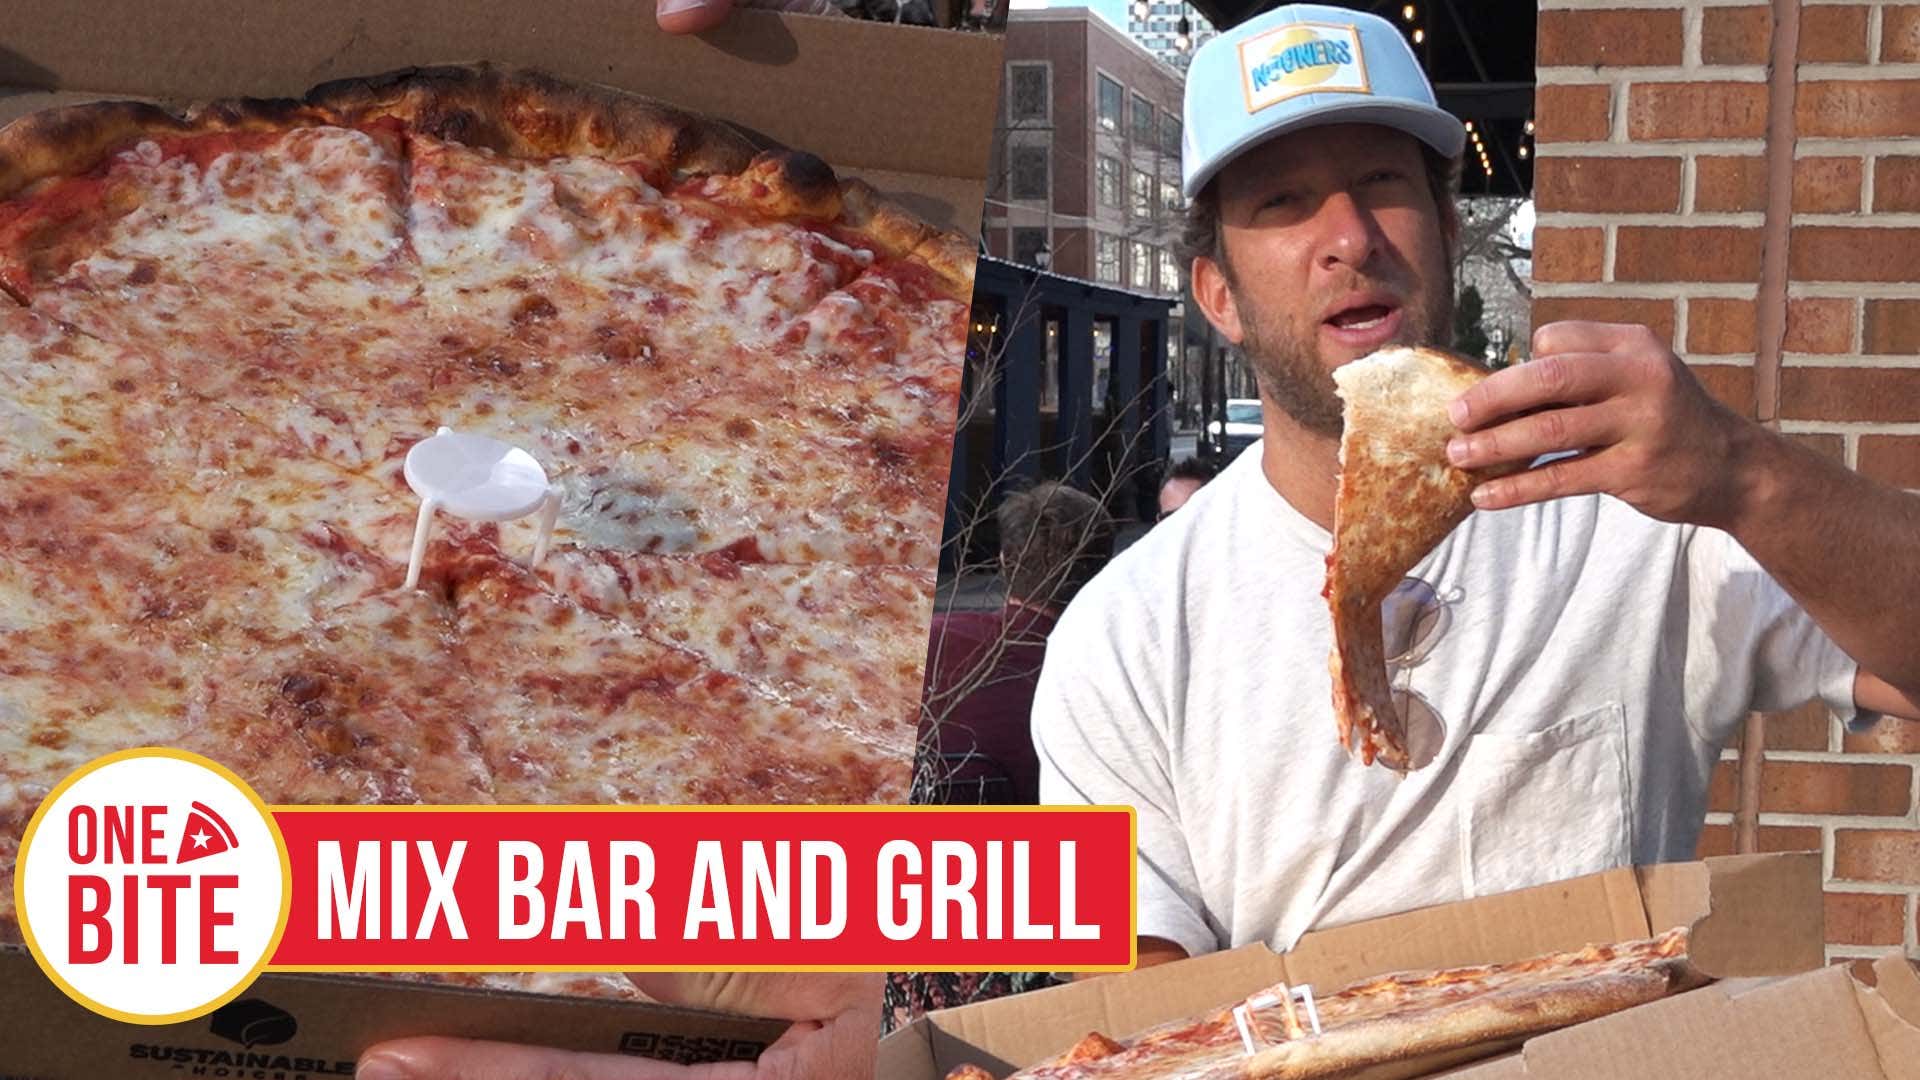 Barstool Pizza Review – Mix Bar and Grill (Philadelphia, PA)